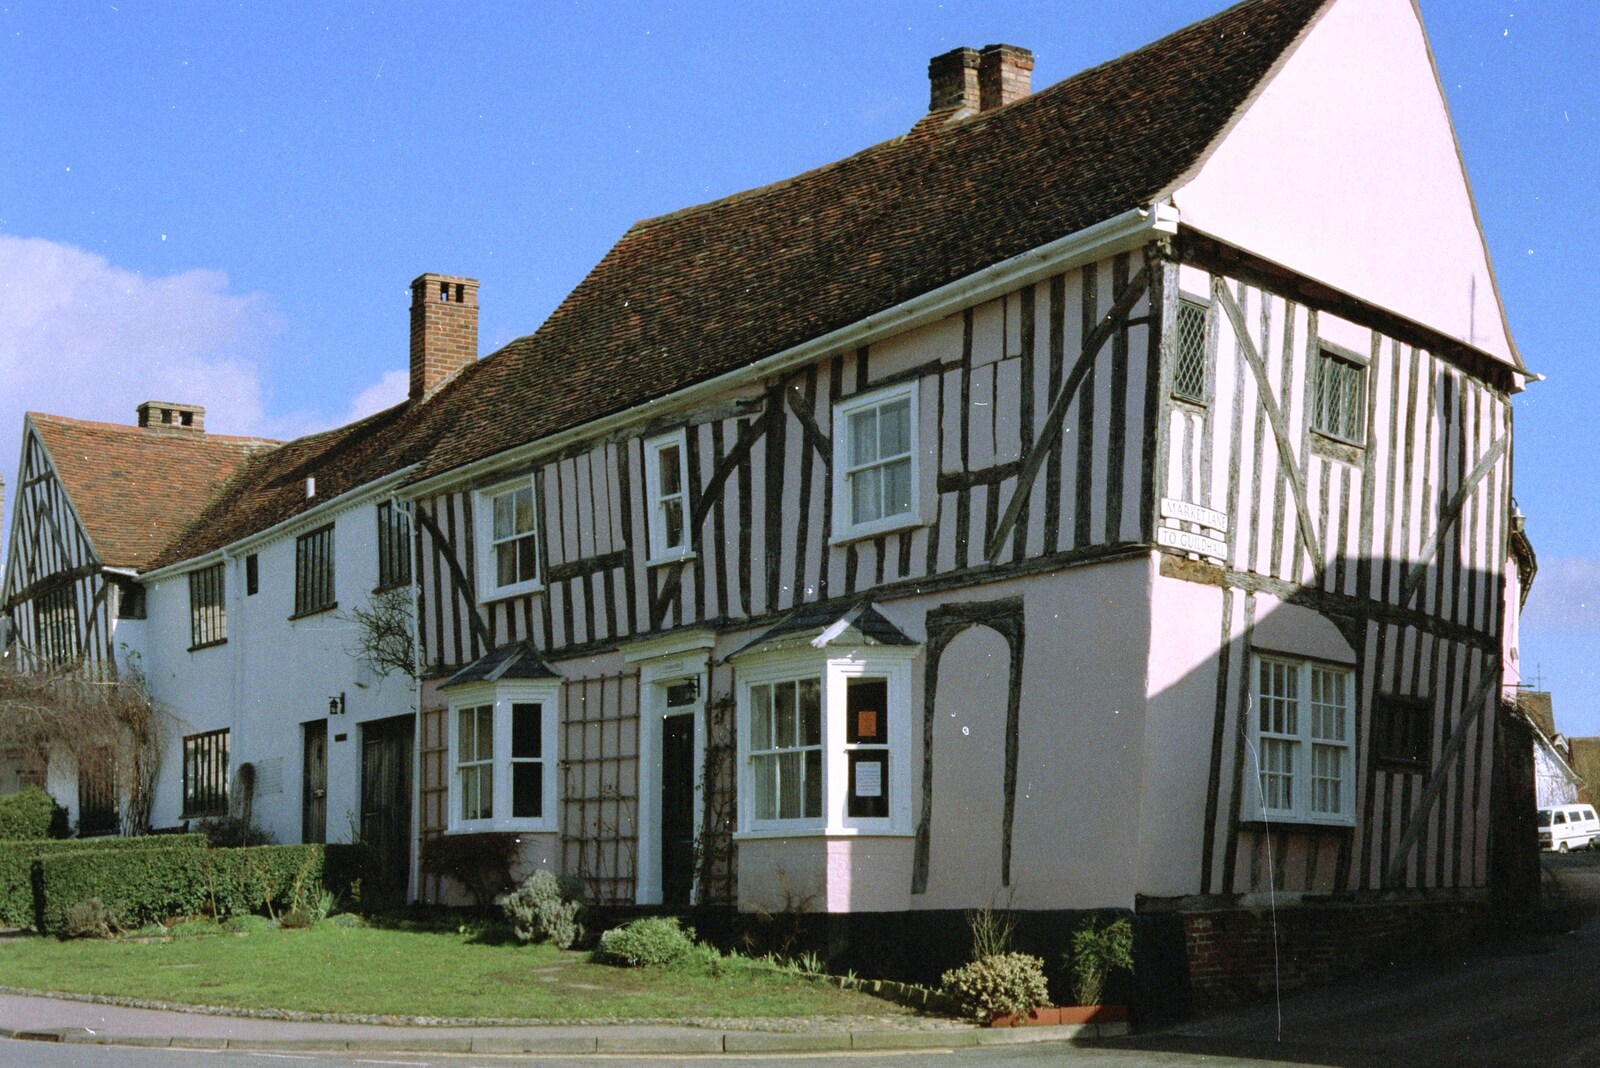 Another wonky house from Mother and Mike Visit, Lavenham, Suffolk - 14th April 1996